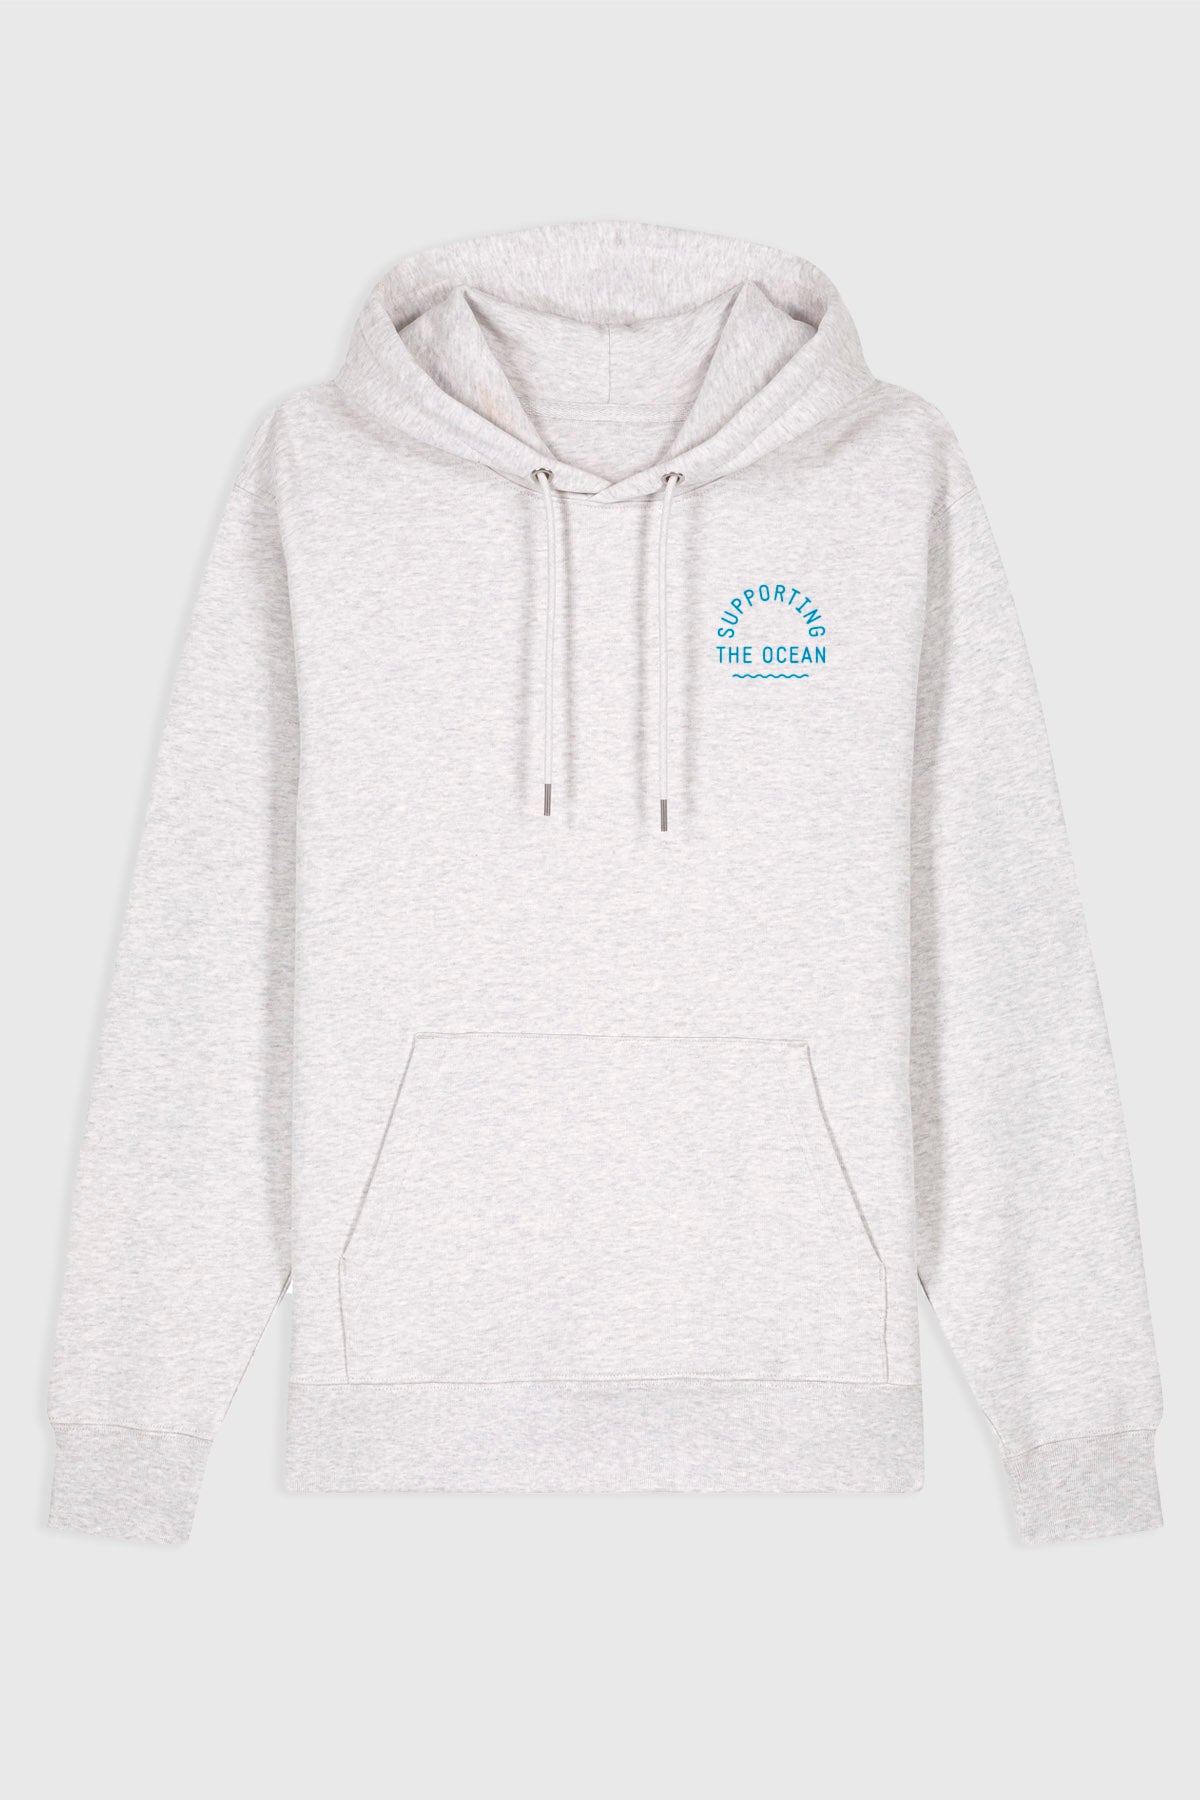 Hoodie "Chasing Sunsets"